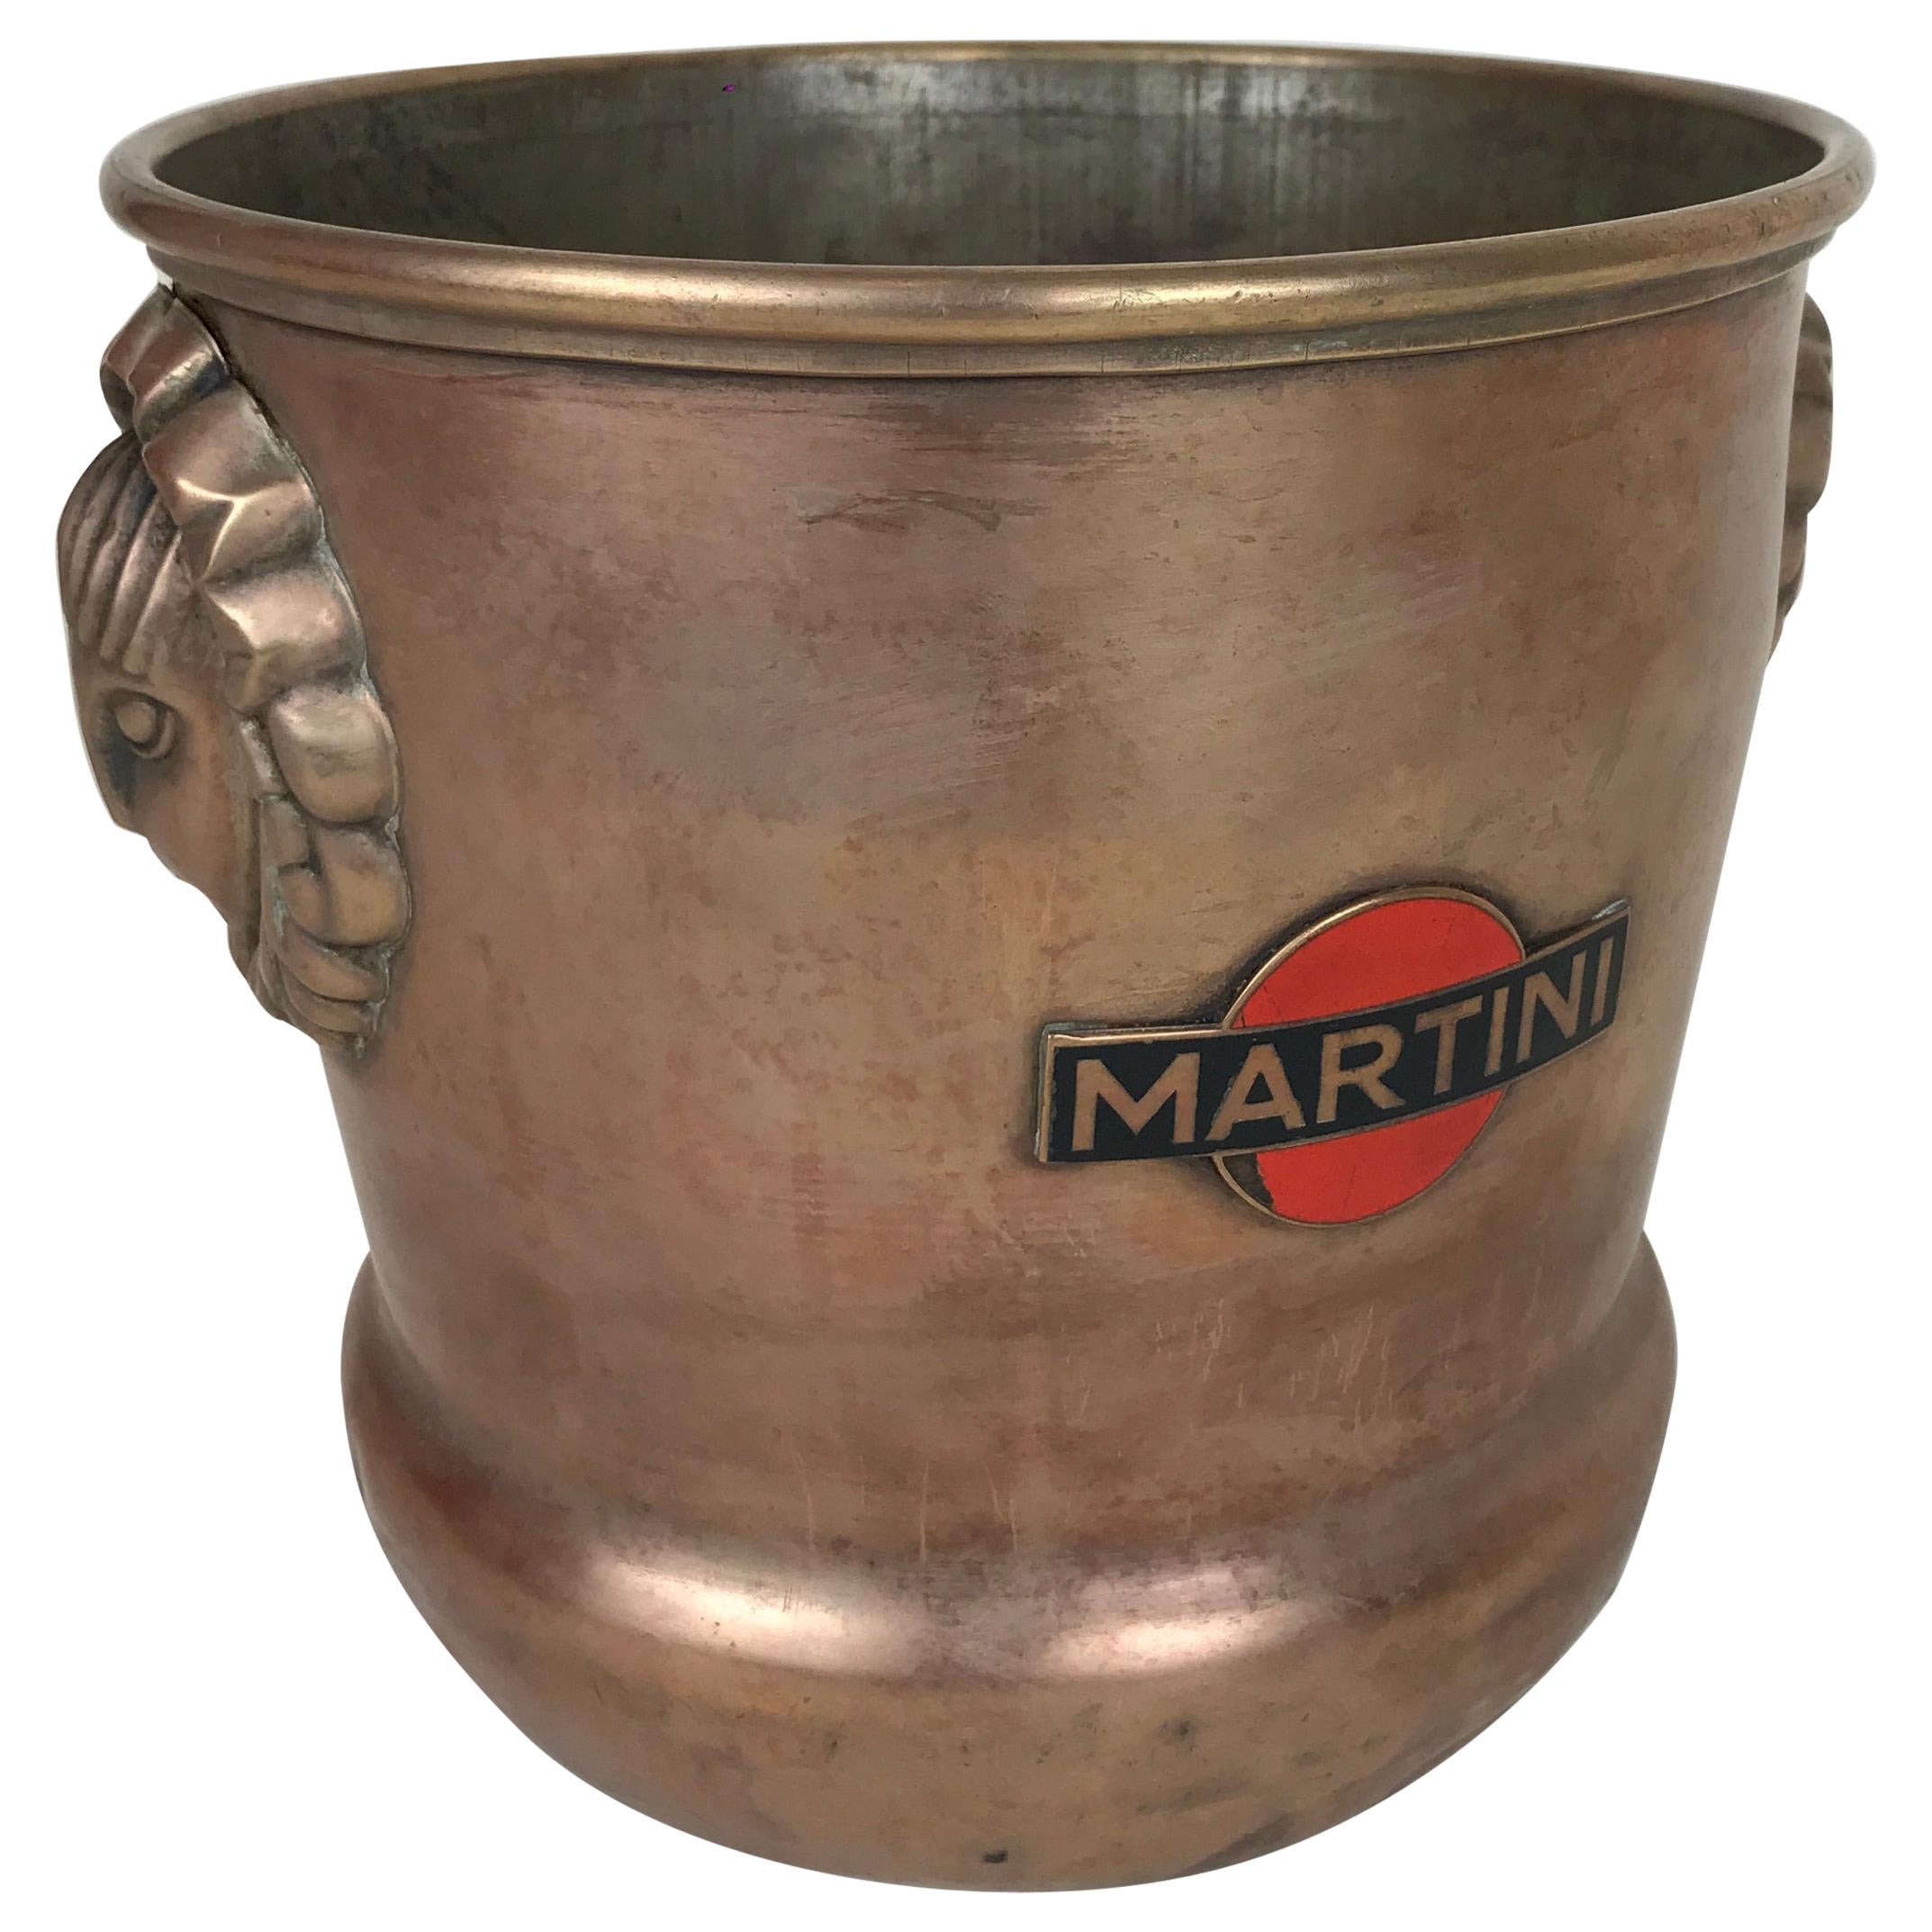 1930s Vintage Brass Italian Ice Bucket Martini with Art Deco Reliefs Made